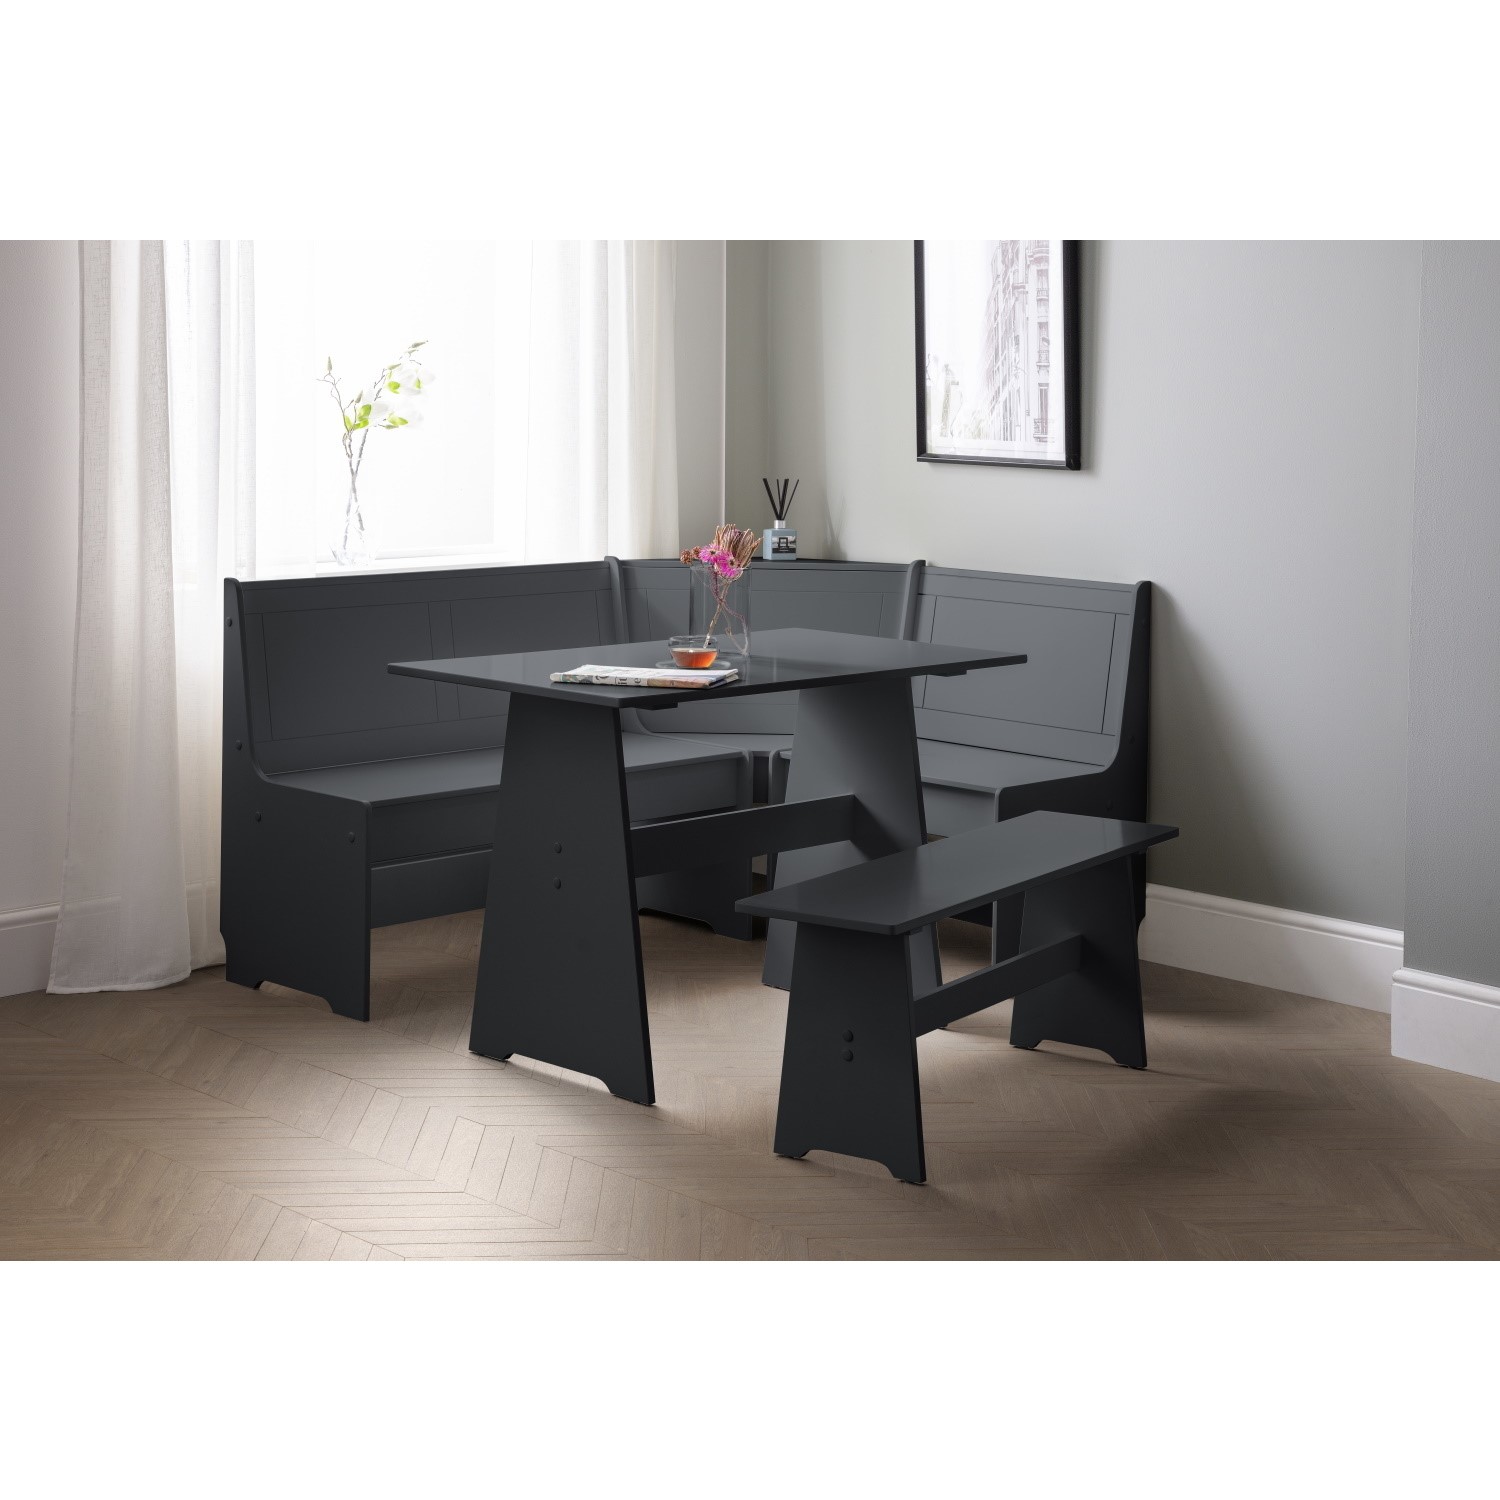 Photo of Dark grey wooden corner dining set with a bench - seats 5 - newport